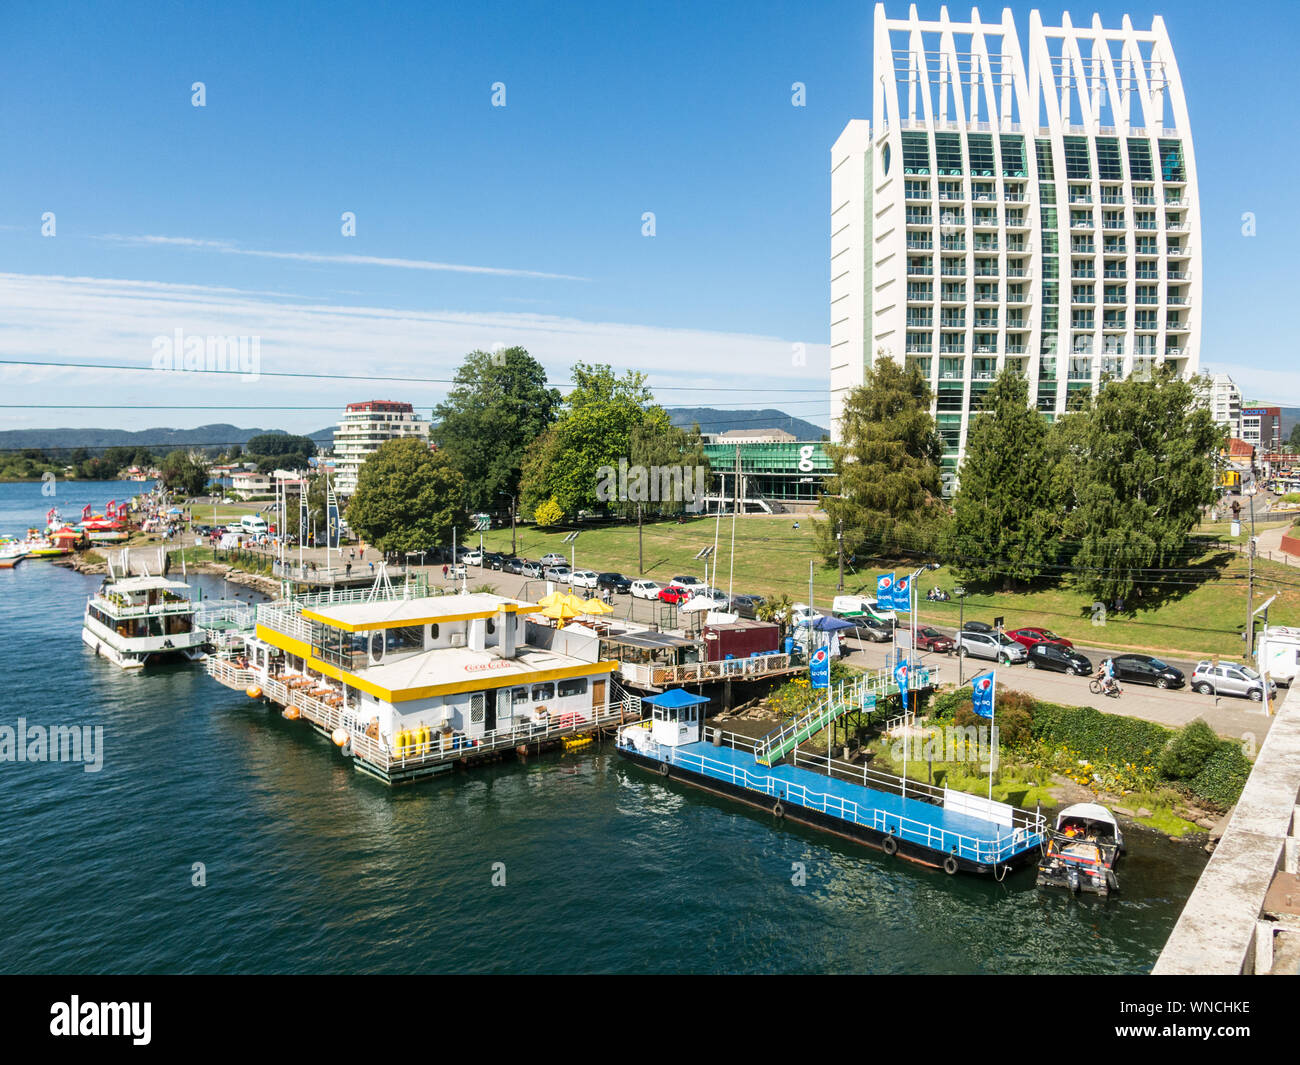 VALDIVIA, CHILE - JANUARY 12, 2018: Waterfront of Valdivia in Southern Chile. Waterfront of Valdivia along the Calle-Calle River in the Lake District Stock Photo